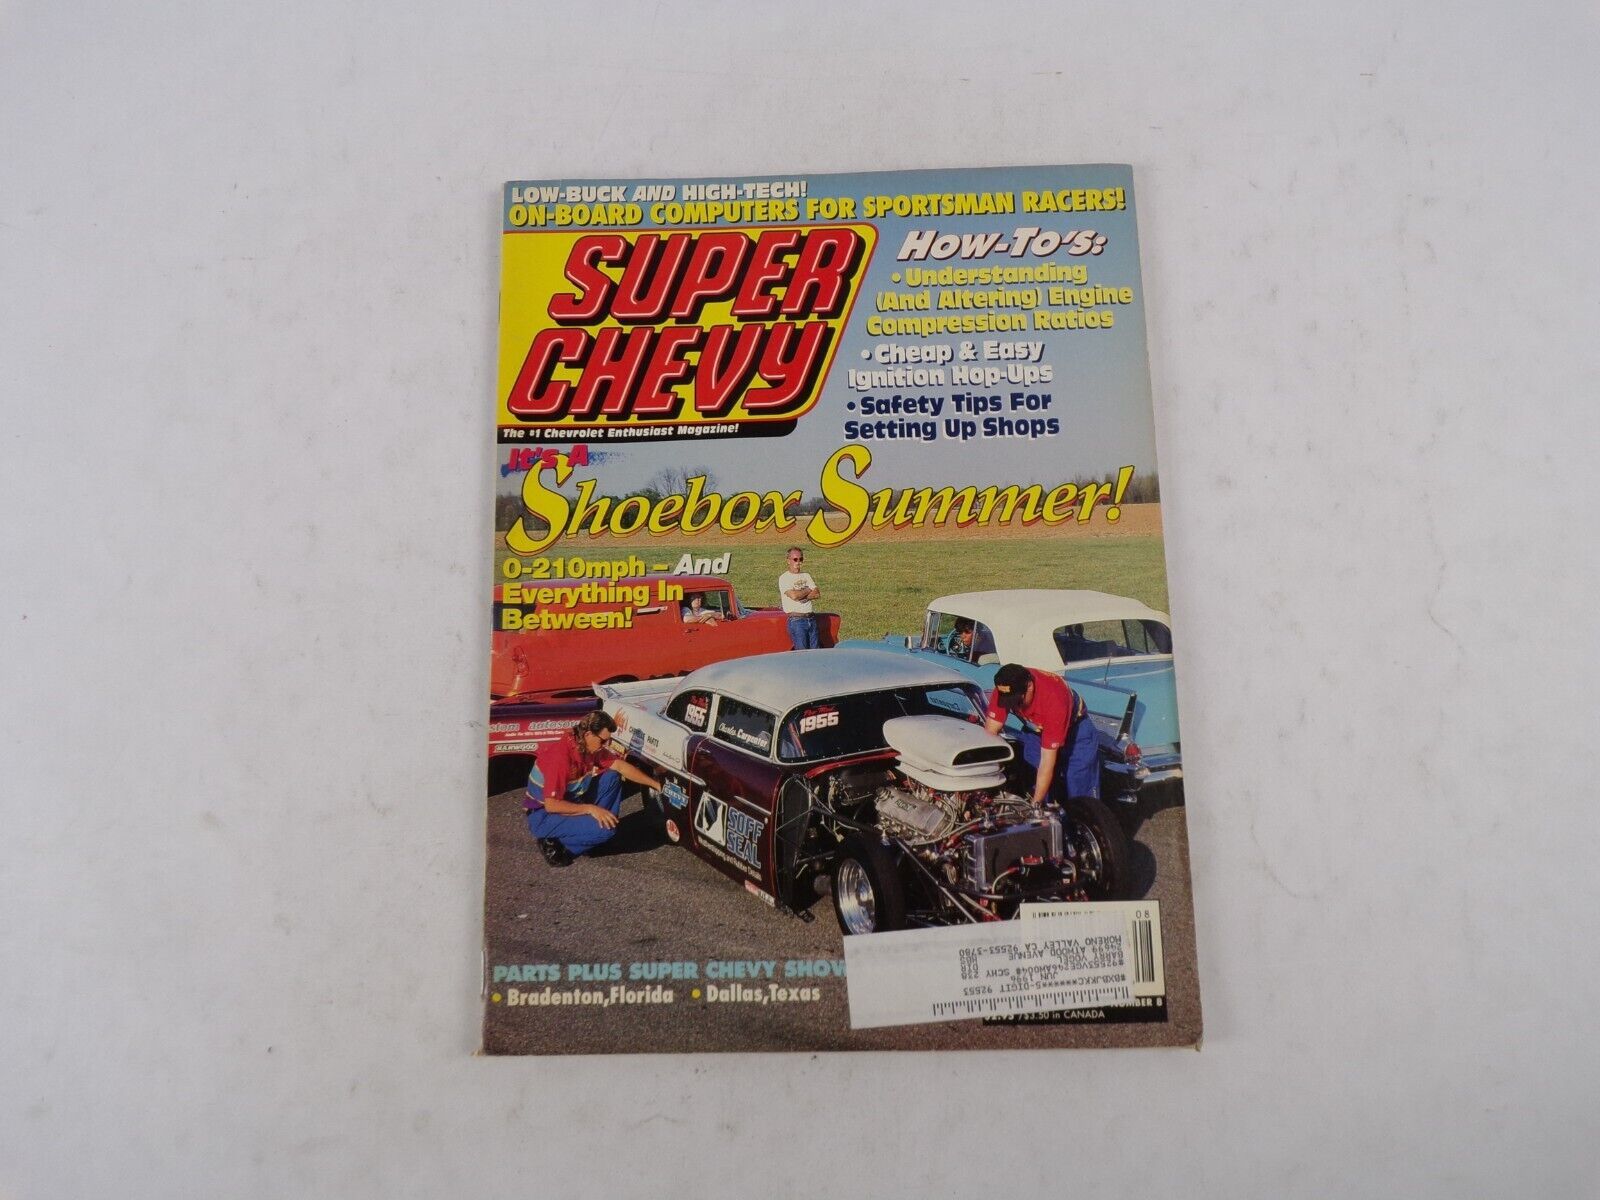 Primary image for June 1996 Super Chevy It's A Shoebox Summer! Cheap&Easy Ignition Hop-Ups Safety